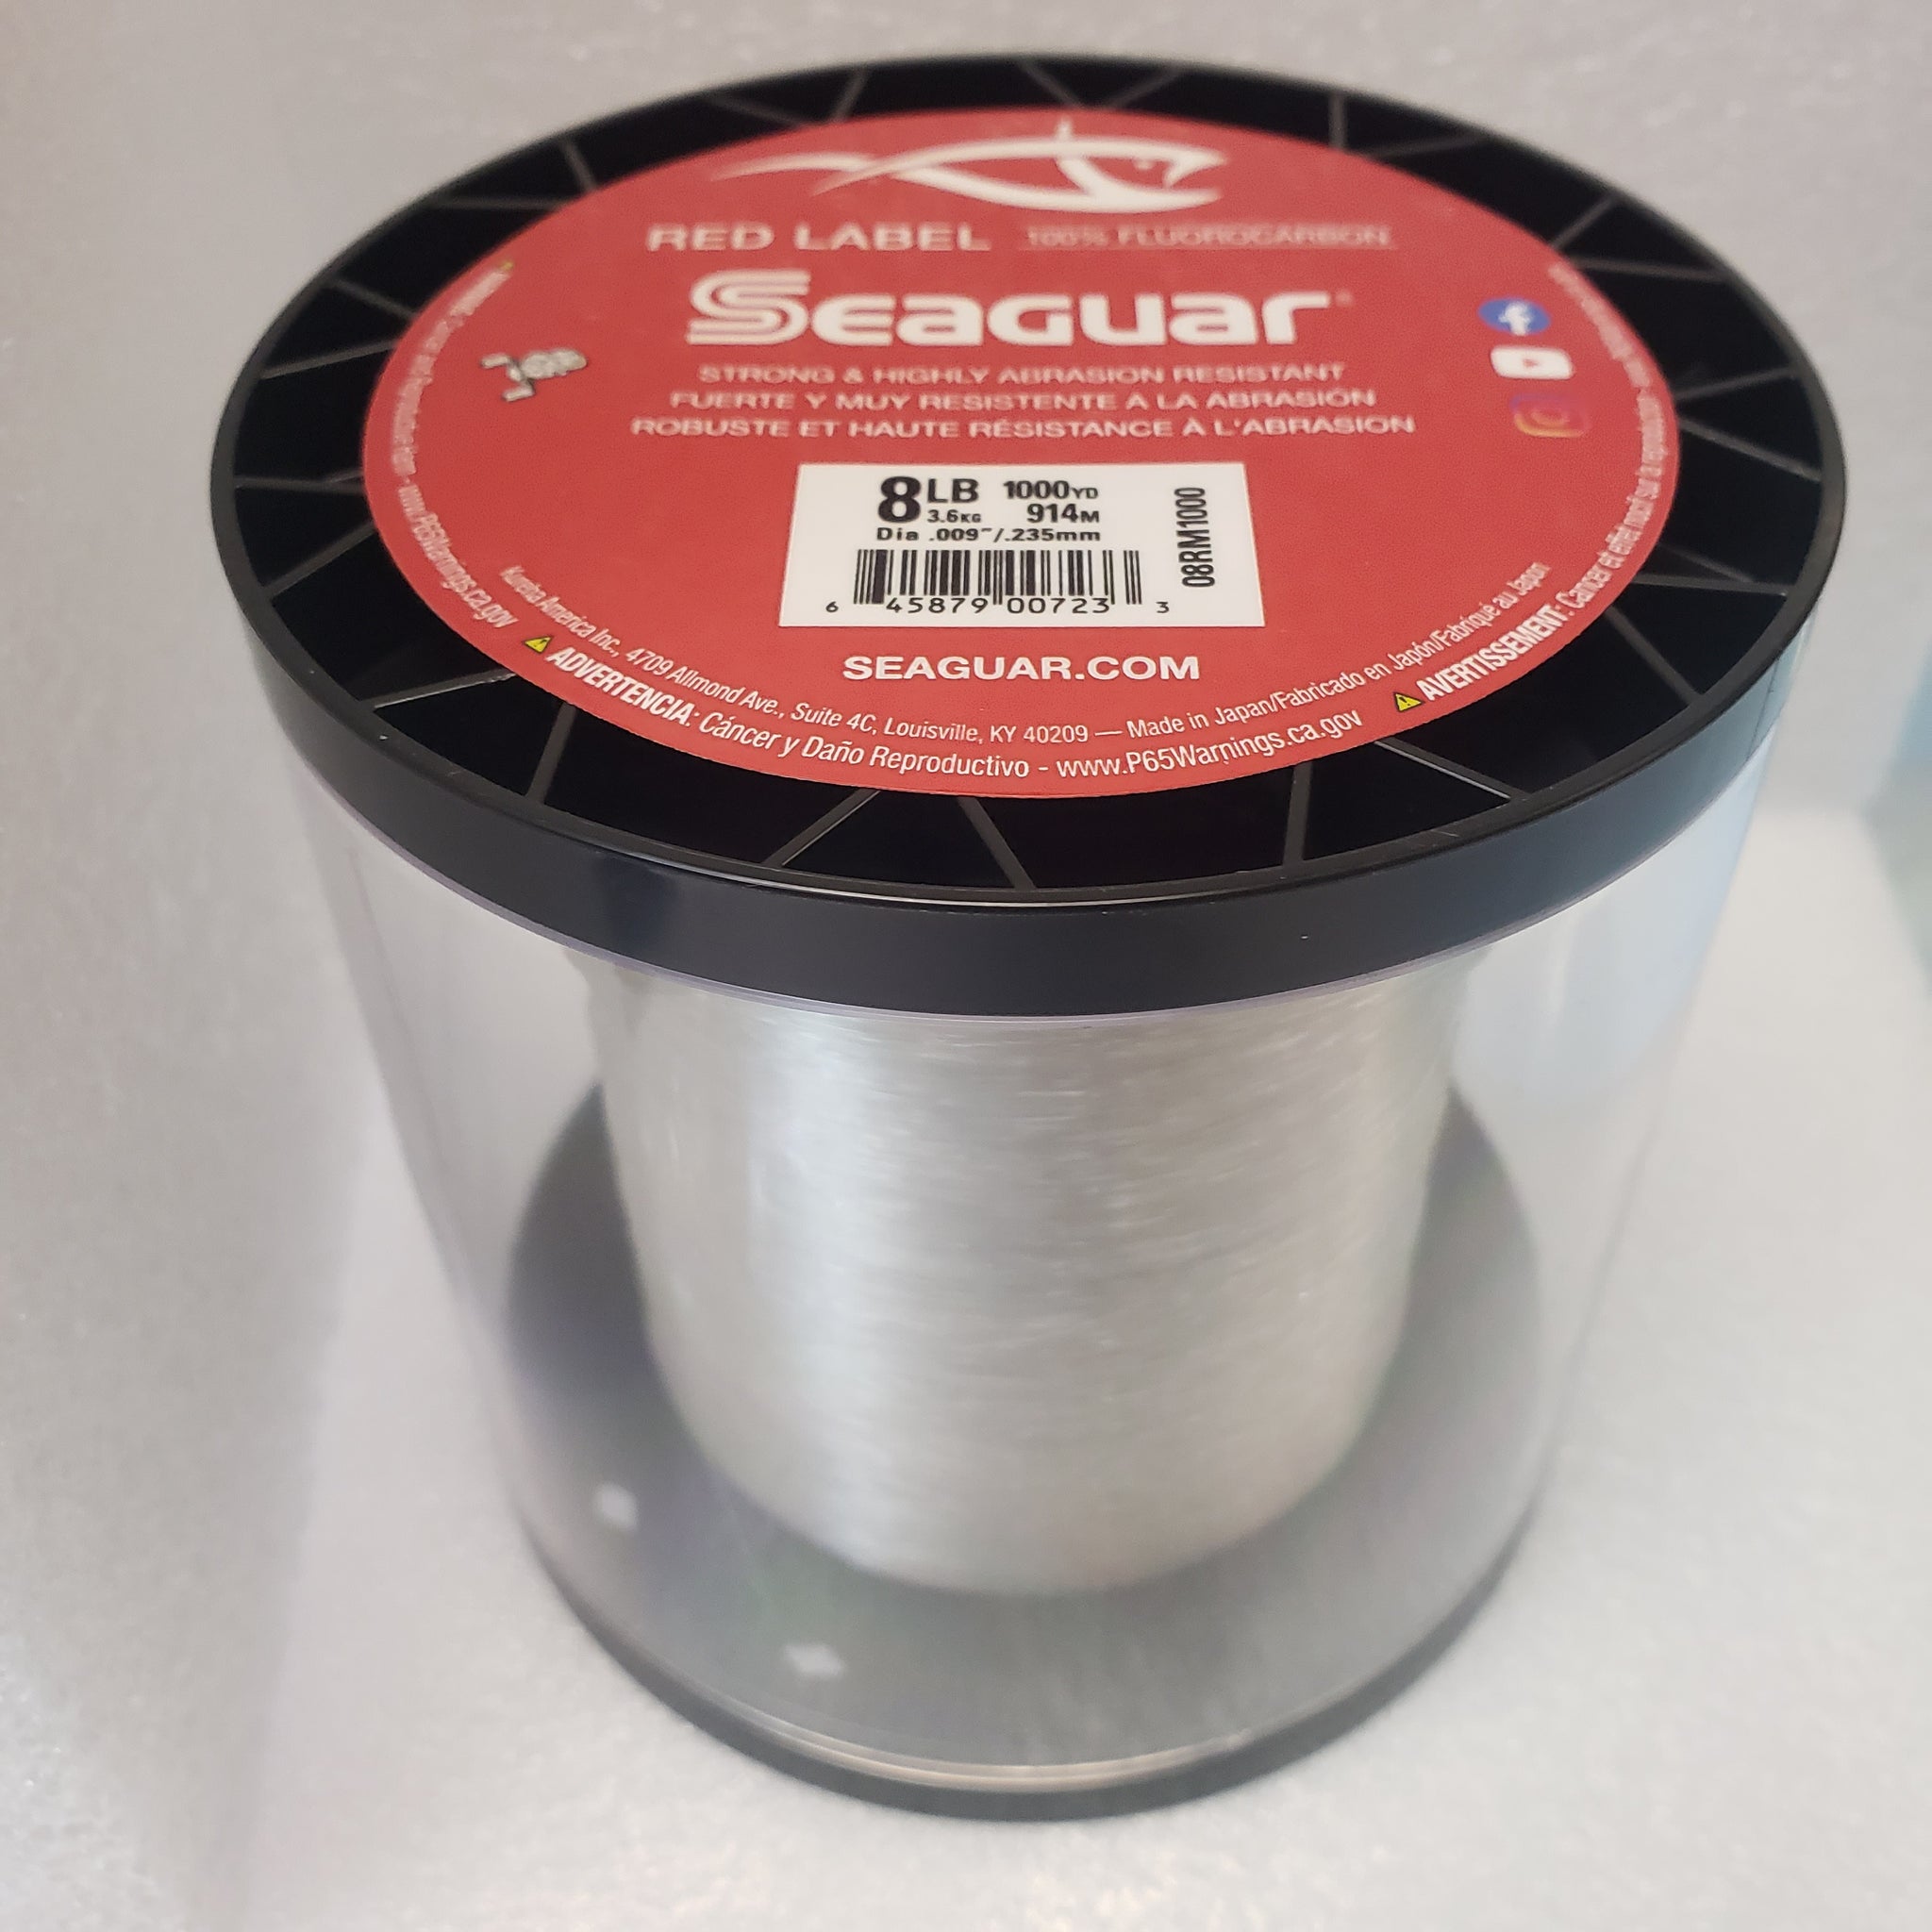 SEAGUAR RED LABEL FLUOROCARBON Fishing Line 20LB-1000YD FREE USA SHIP NEW!